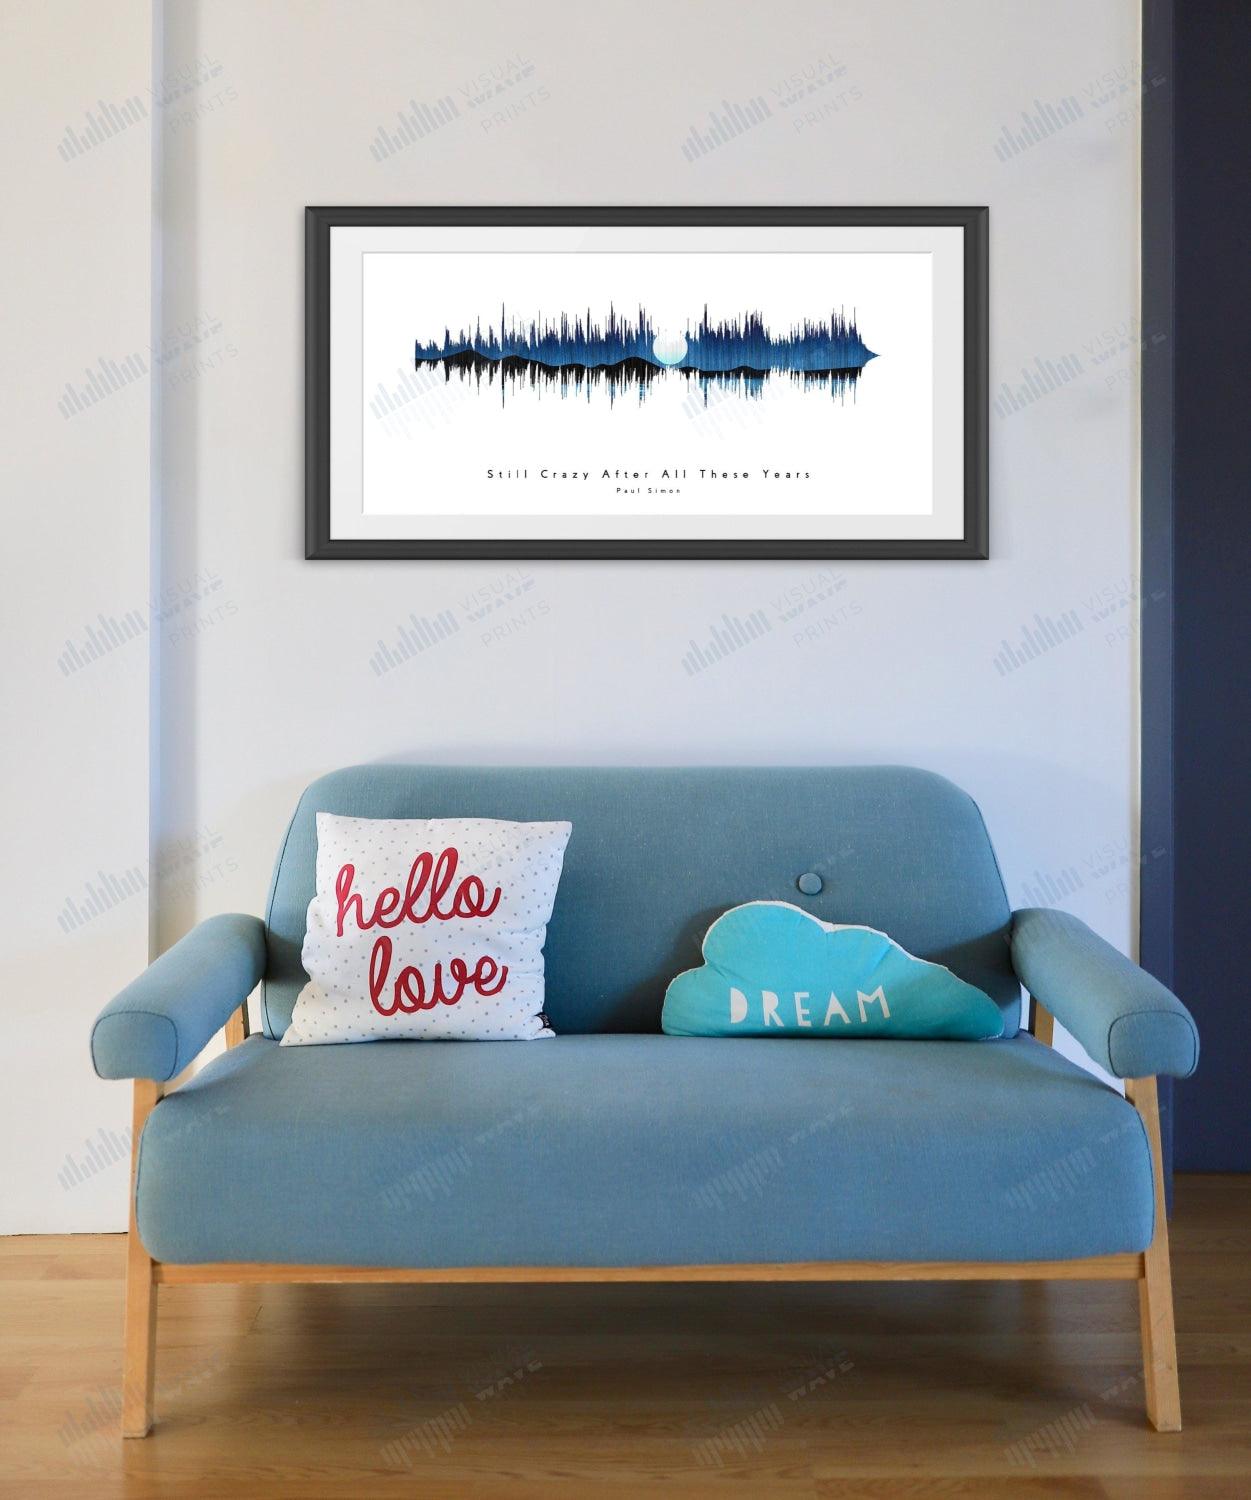 Still Crazy After All These Years by Paul Simon - Visual Wave Prints